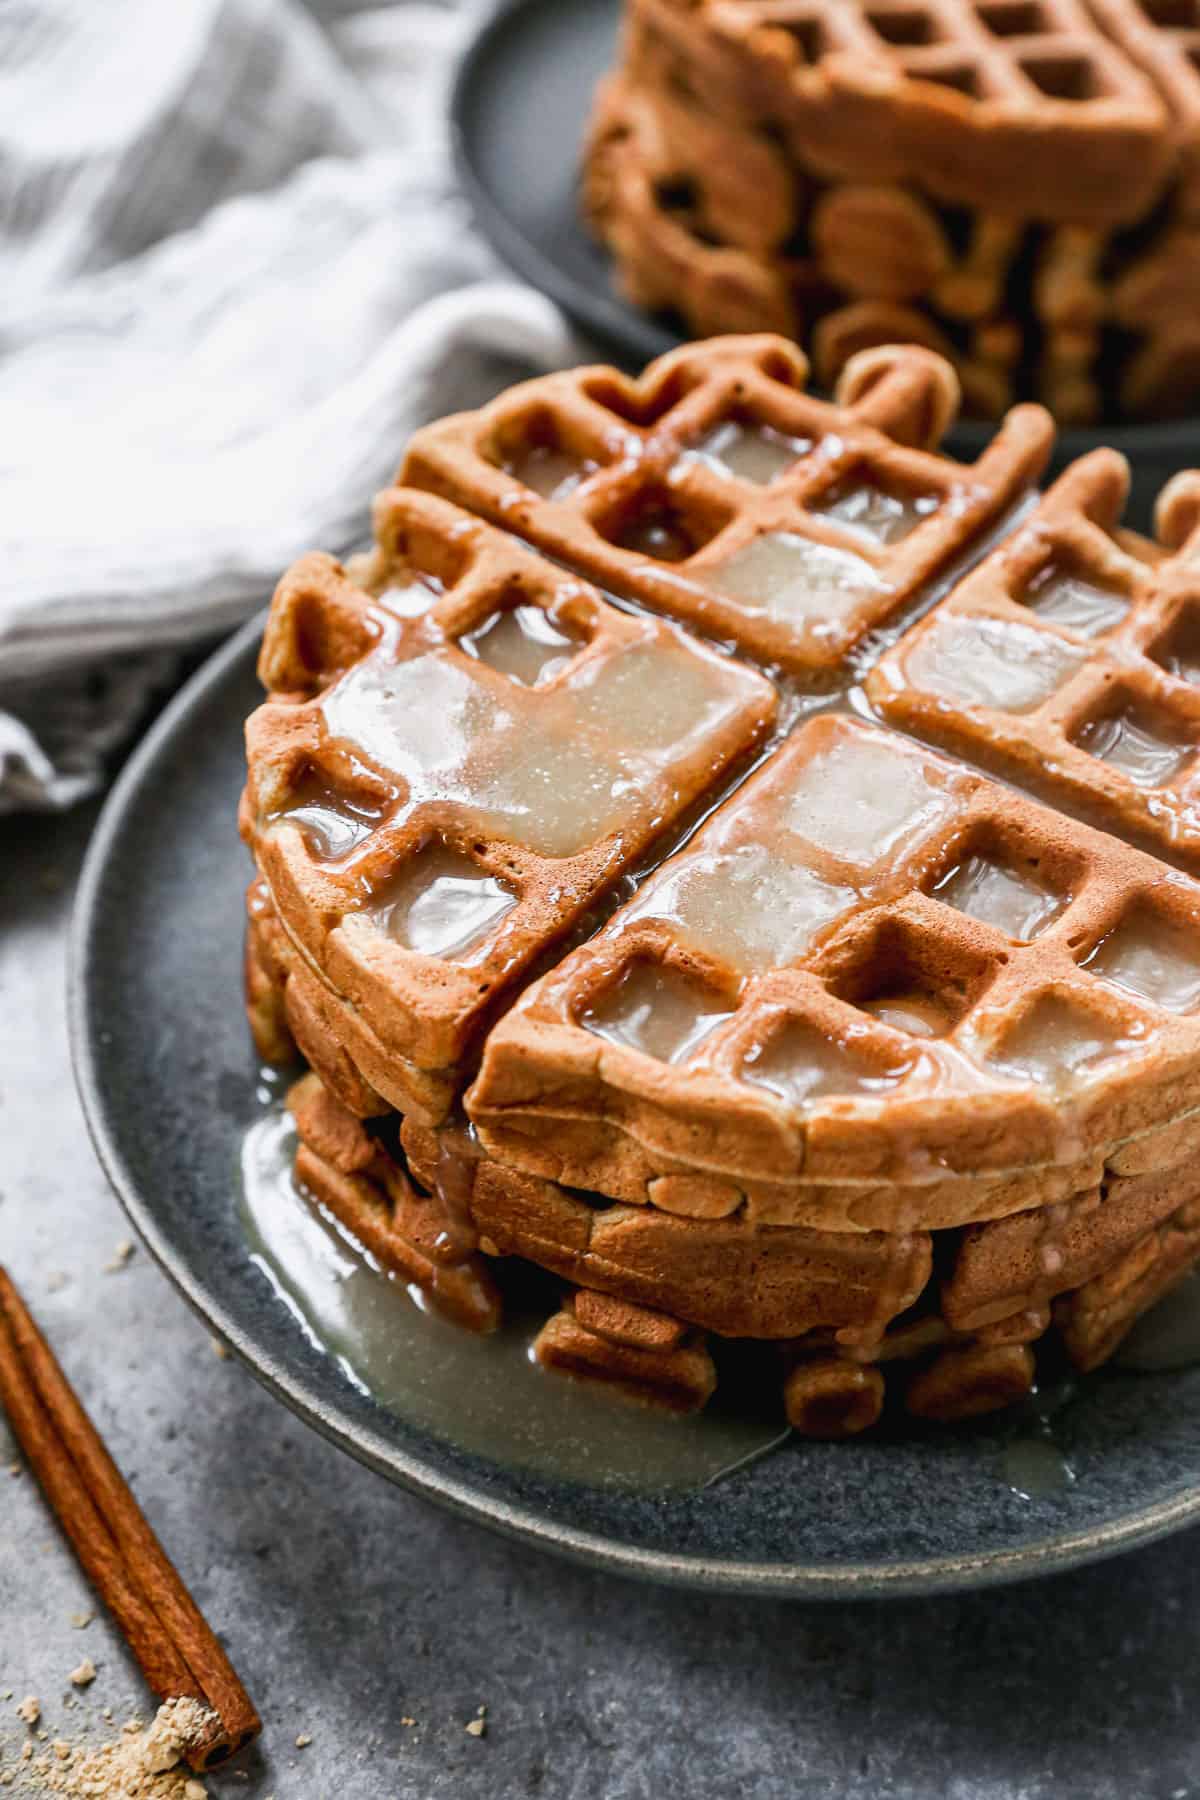 A close up image of a stack of Gingerbread Waffles with vanilla syrup poured on top.